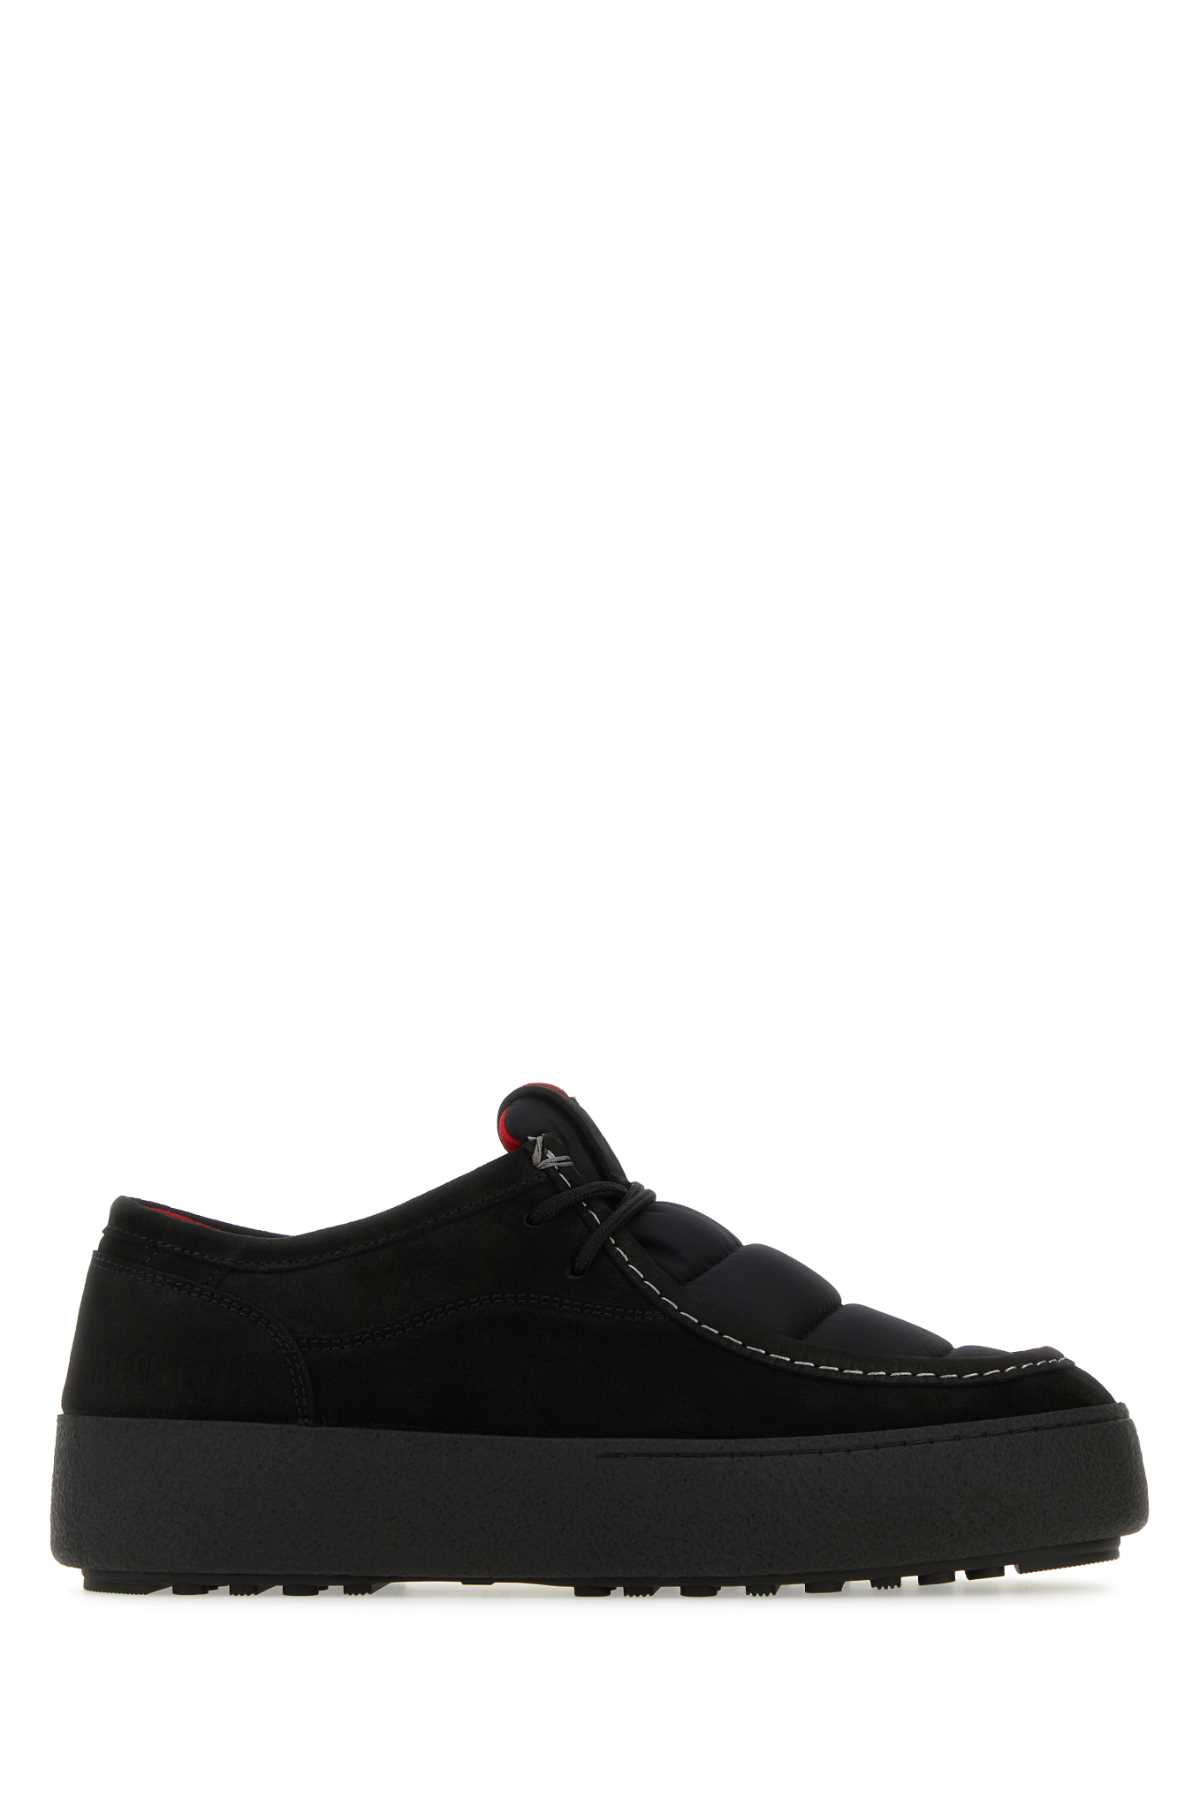 Black Suede And Nylon Mtrack Low Ankle Boots